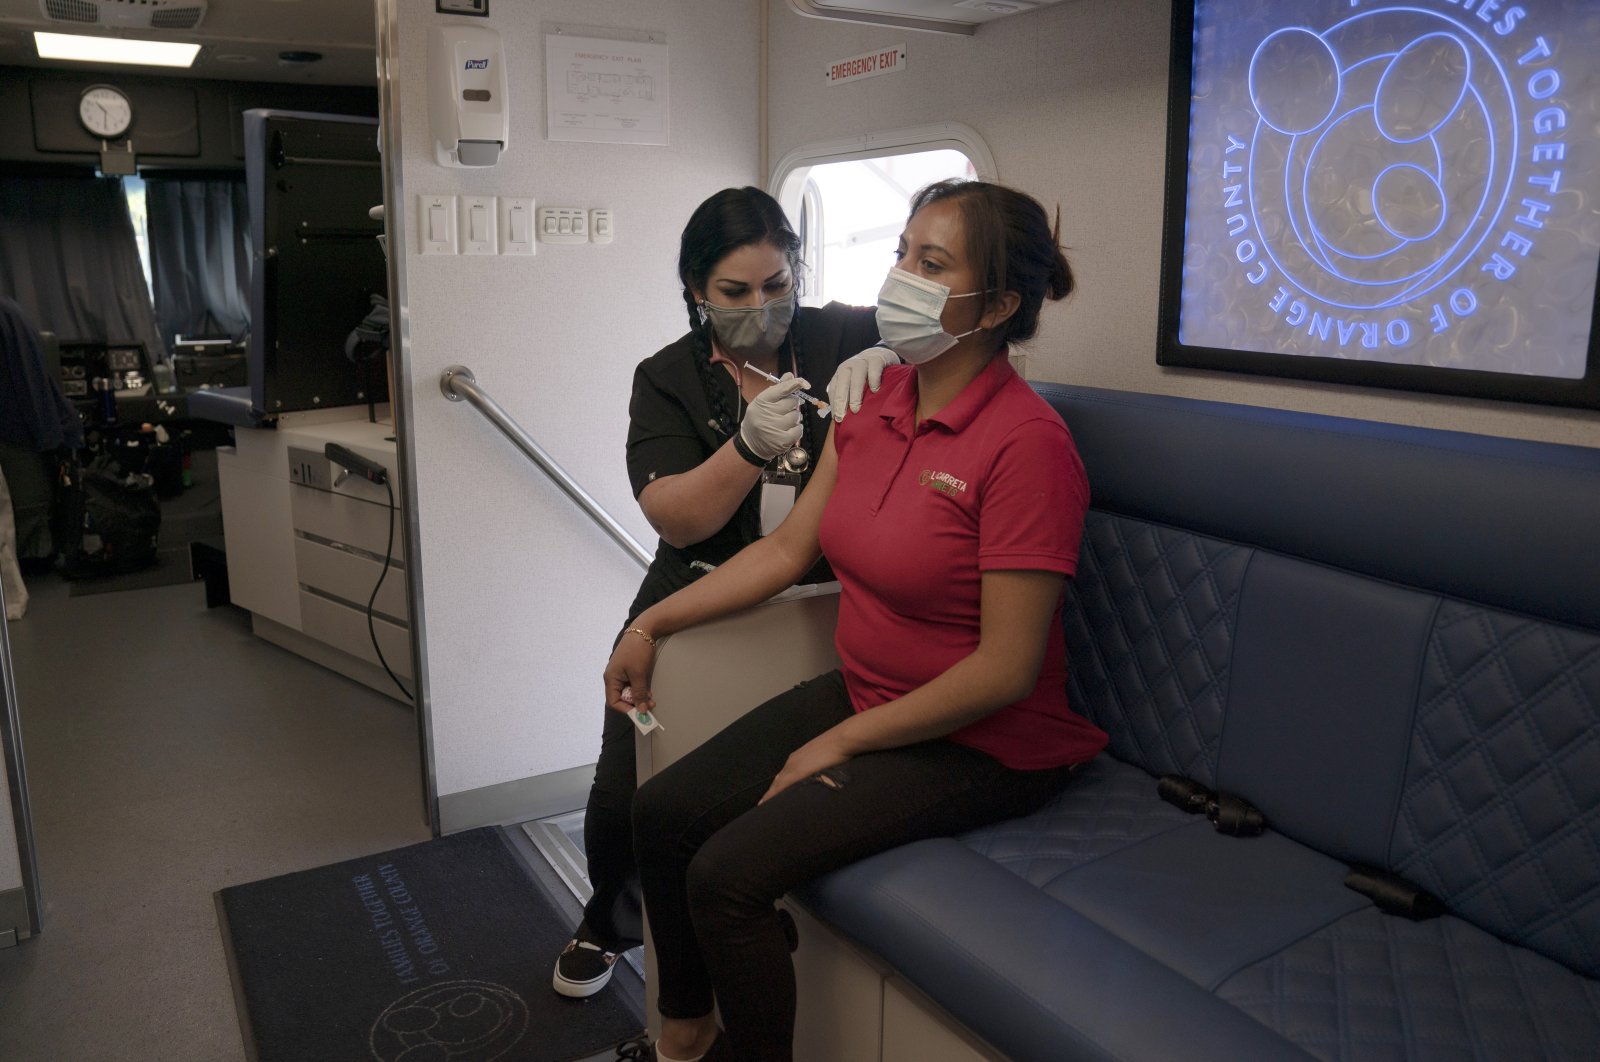 A nurse administers a dose of the Moderna COVID-19 vaccine to a woman in a mobile clinic set up in the parking lot of a shopping center in Orange, California, U.S., April 29, 2021. (AP Photo)